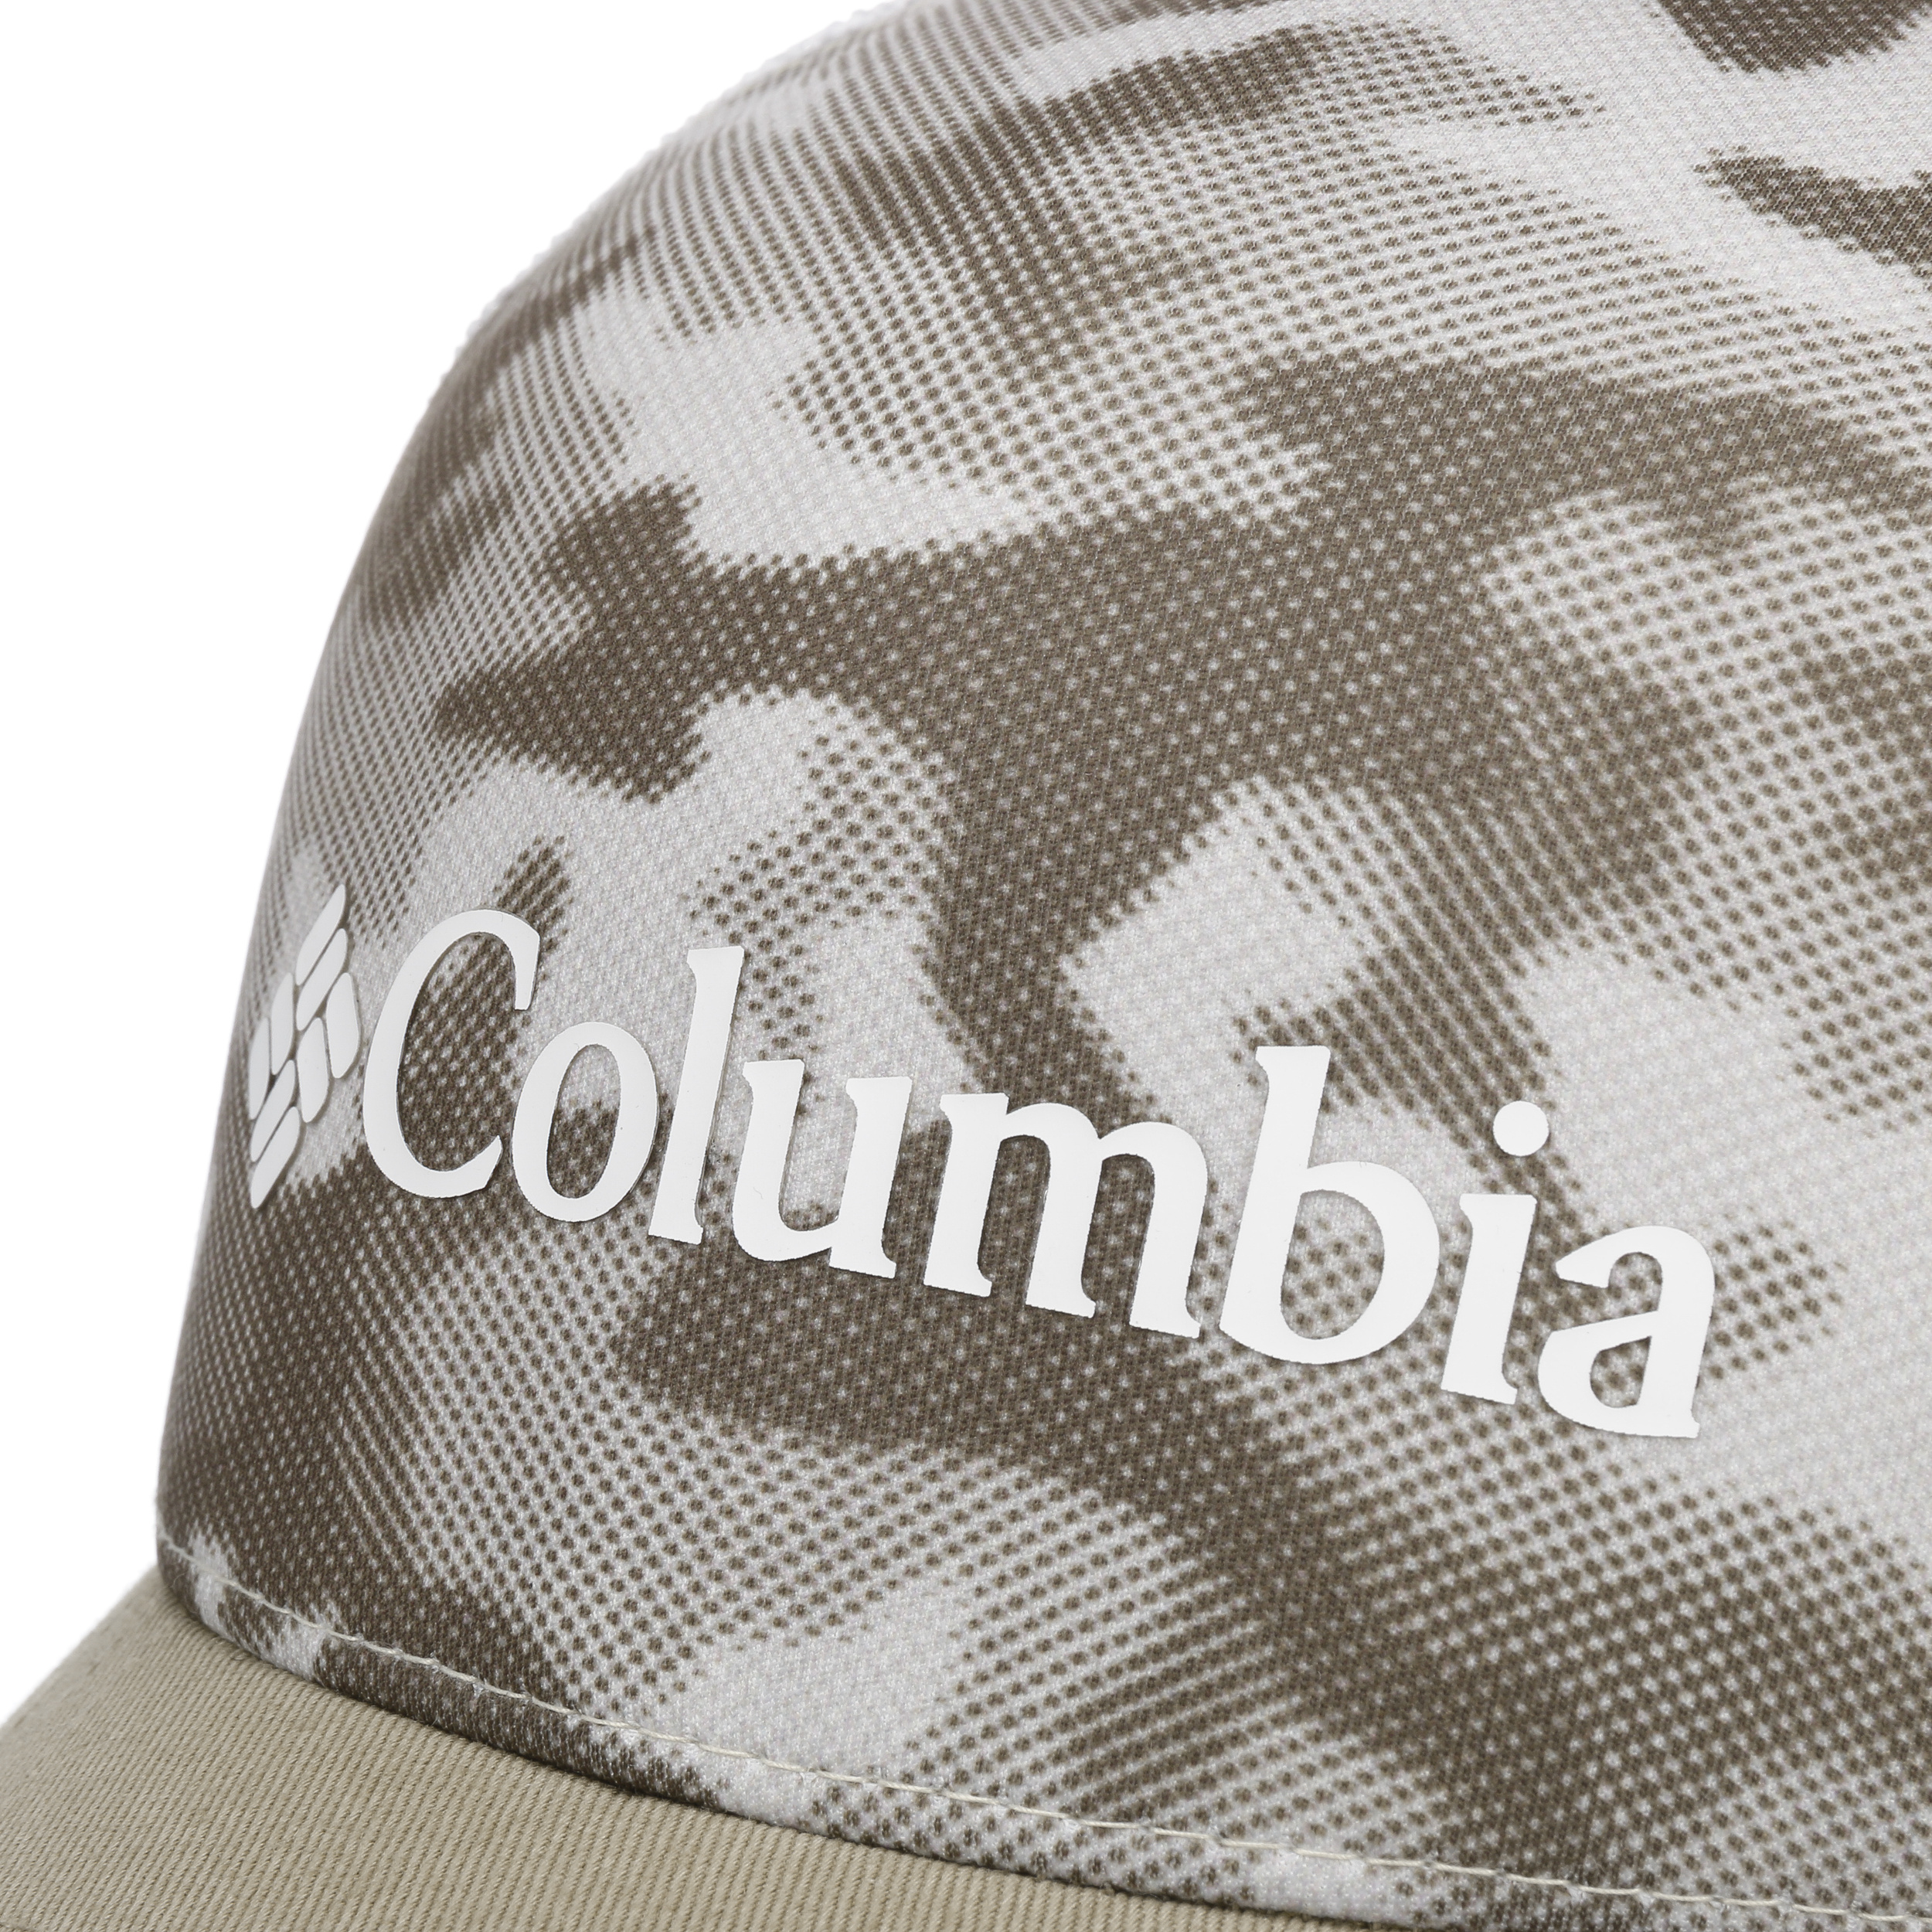 New Punchbowl Trucker Cap by Columbia - 28,95 £